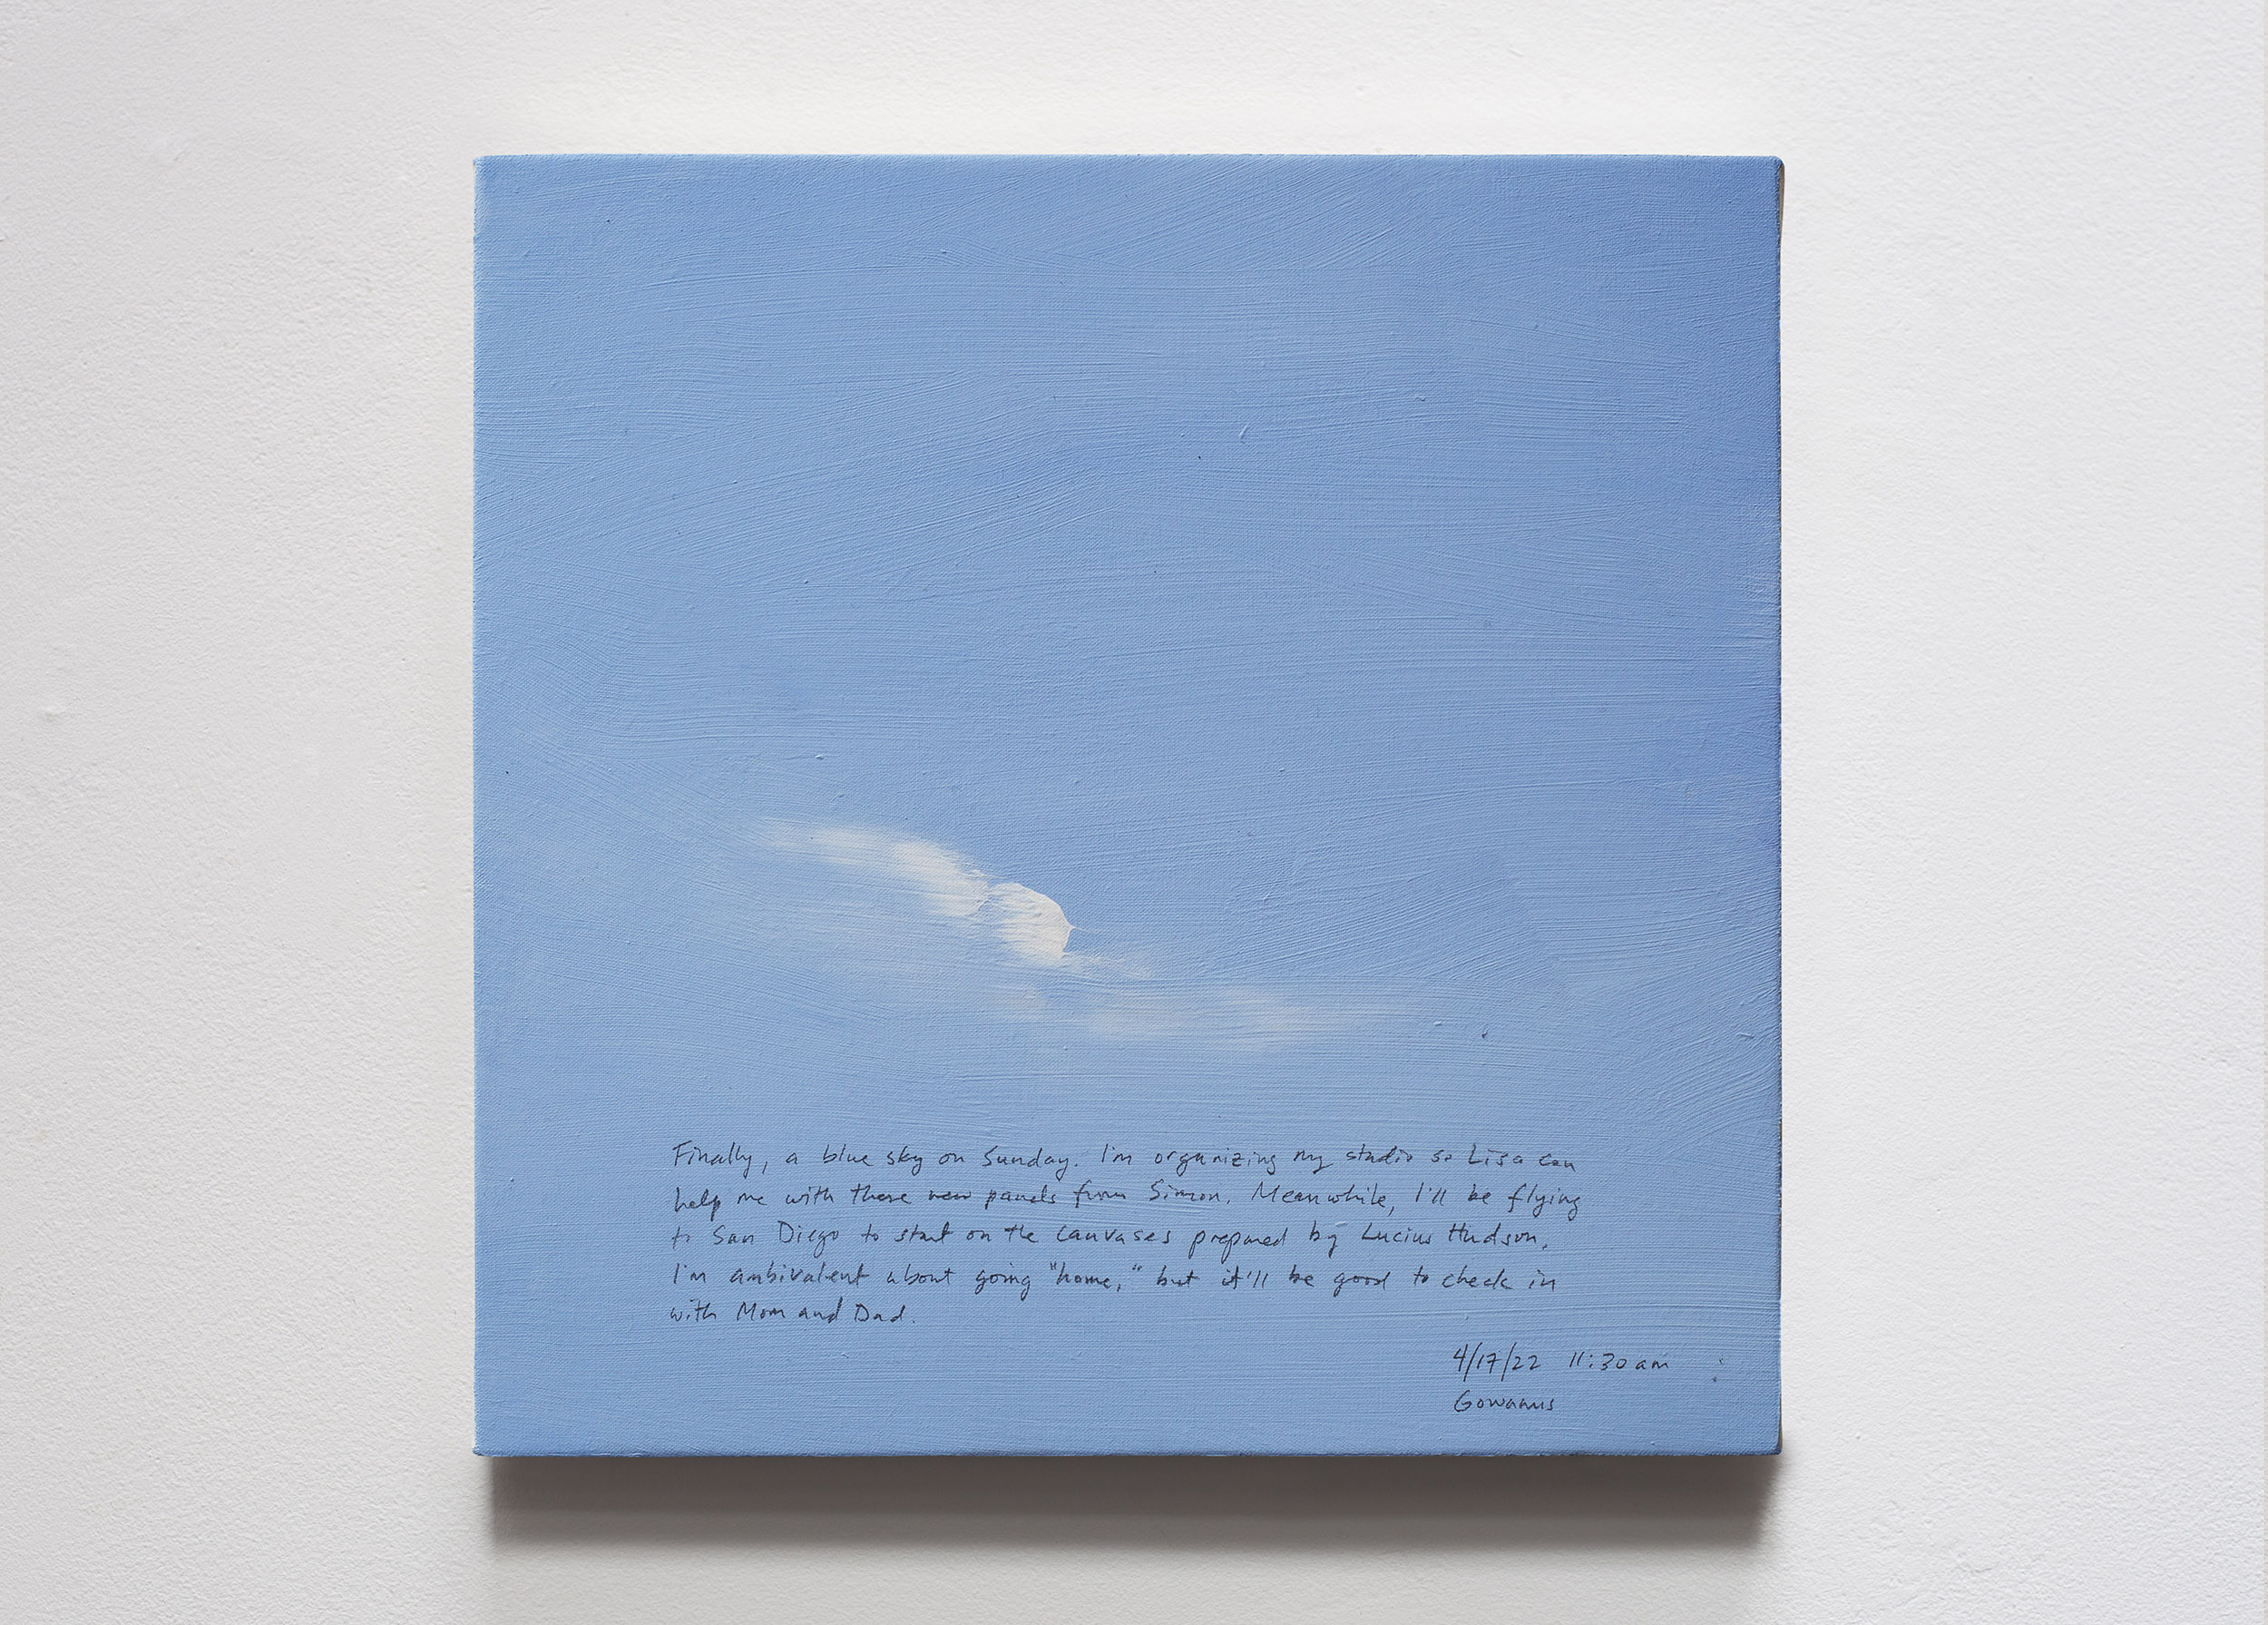 A 14 × 14 inch, acrylic painting of the sky. A journal entry is handwritten on the painting:

“Finally, a blue sky on Sunday. I’m organizing my studio so Lisa can help me with these new panels from Simon. Meanwhile, I’ll be flying to San Diego to start on the canvases prepared by Lucius Hudson. I’m ambivalent about going “home,” but it’ll be good to check in with Mom and Dad.

4/17/22 11:30 am
Gowanus”